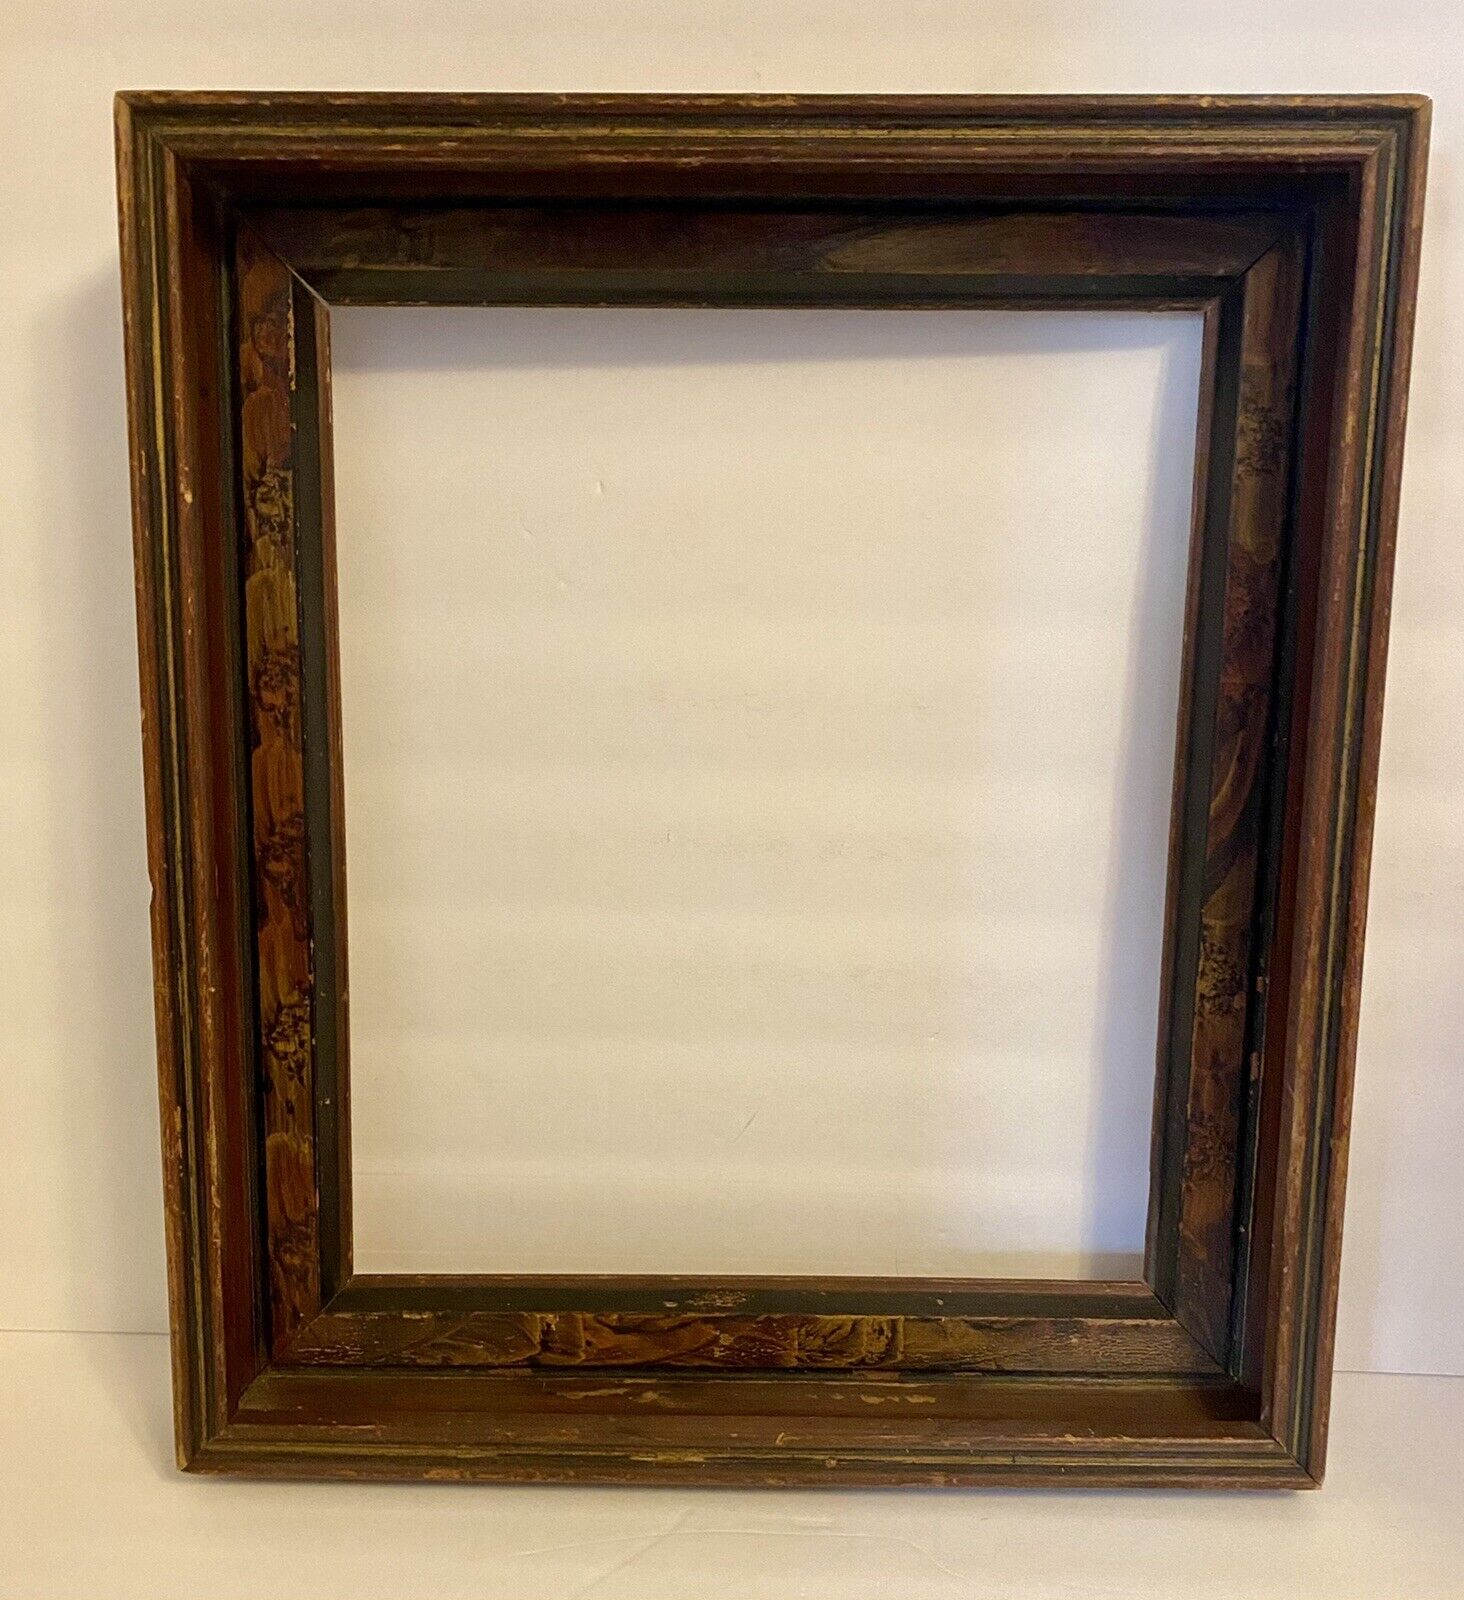 Distressed Antique Deep Well Frame W/ Black And Gold Accents